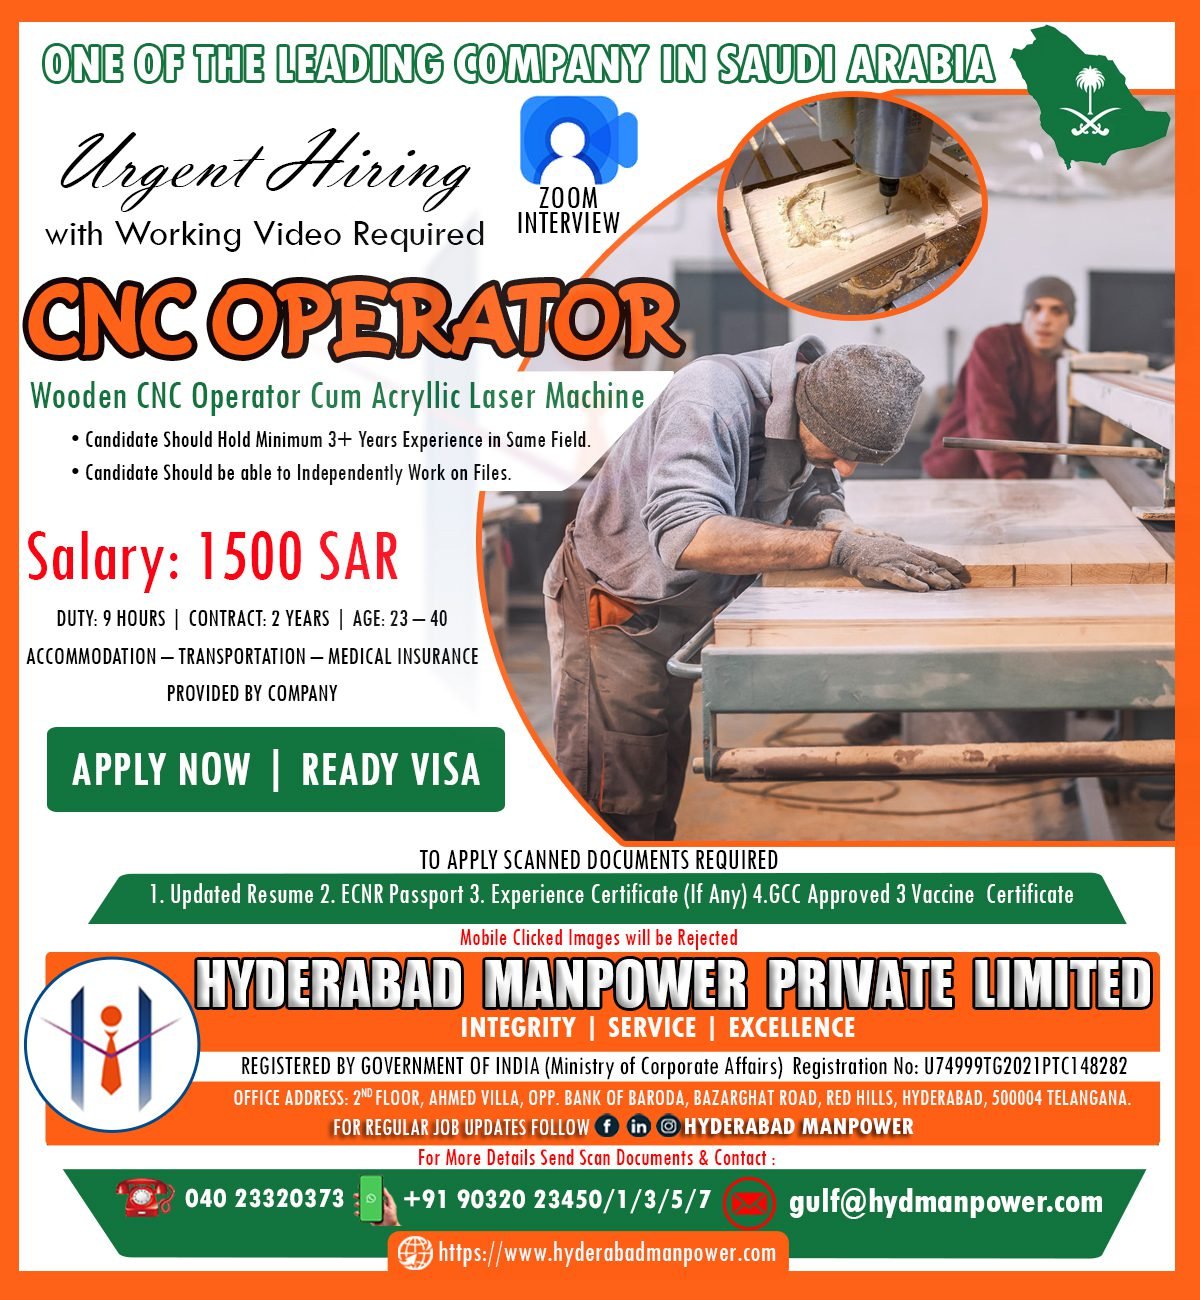 Hyderabad Manpower Private Limited #Hyderabad #Manpower #Private #Limited